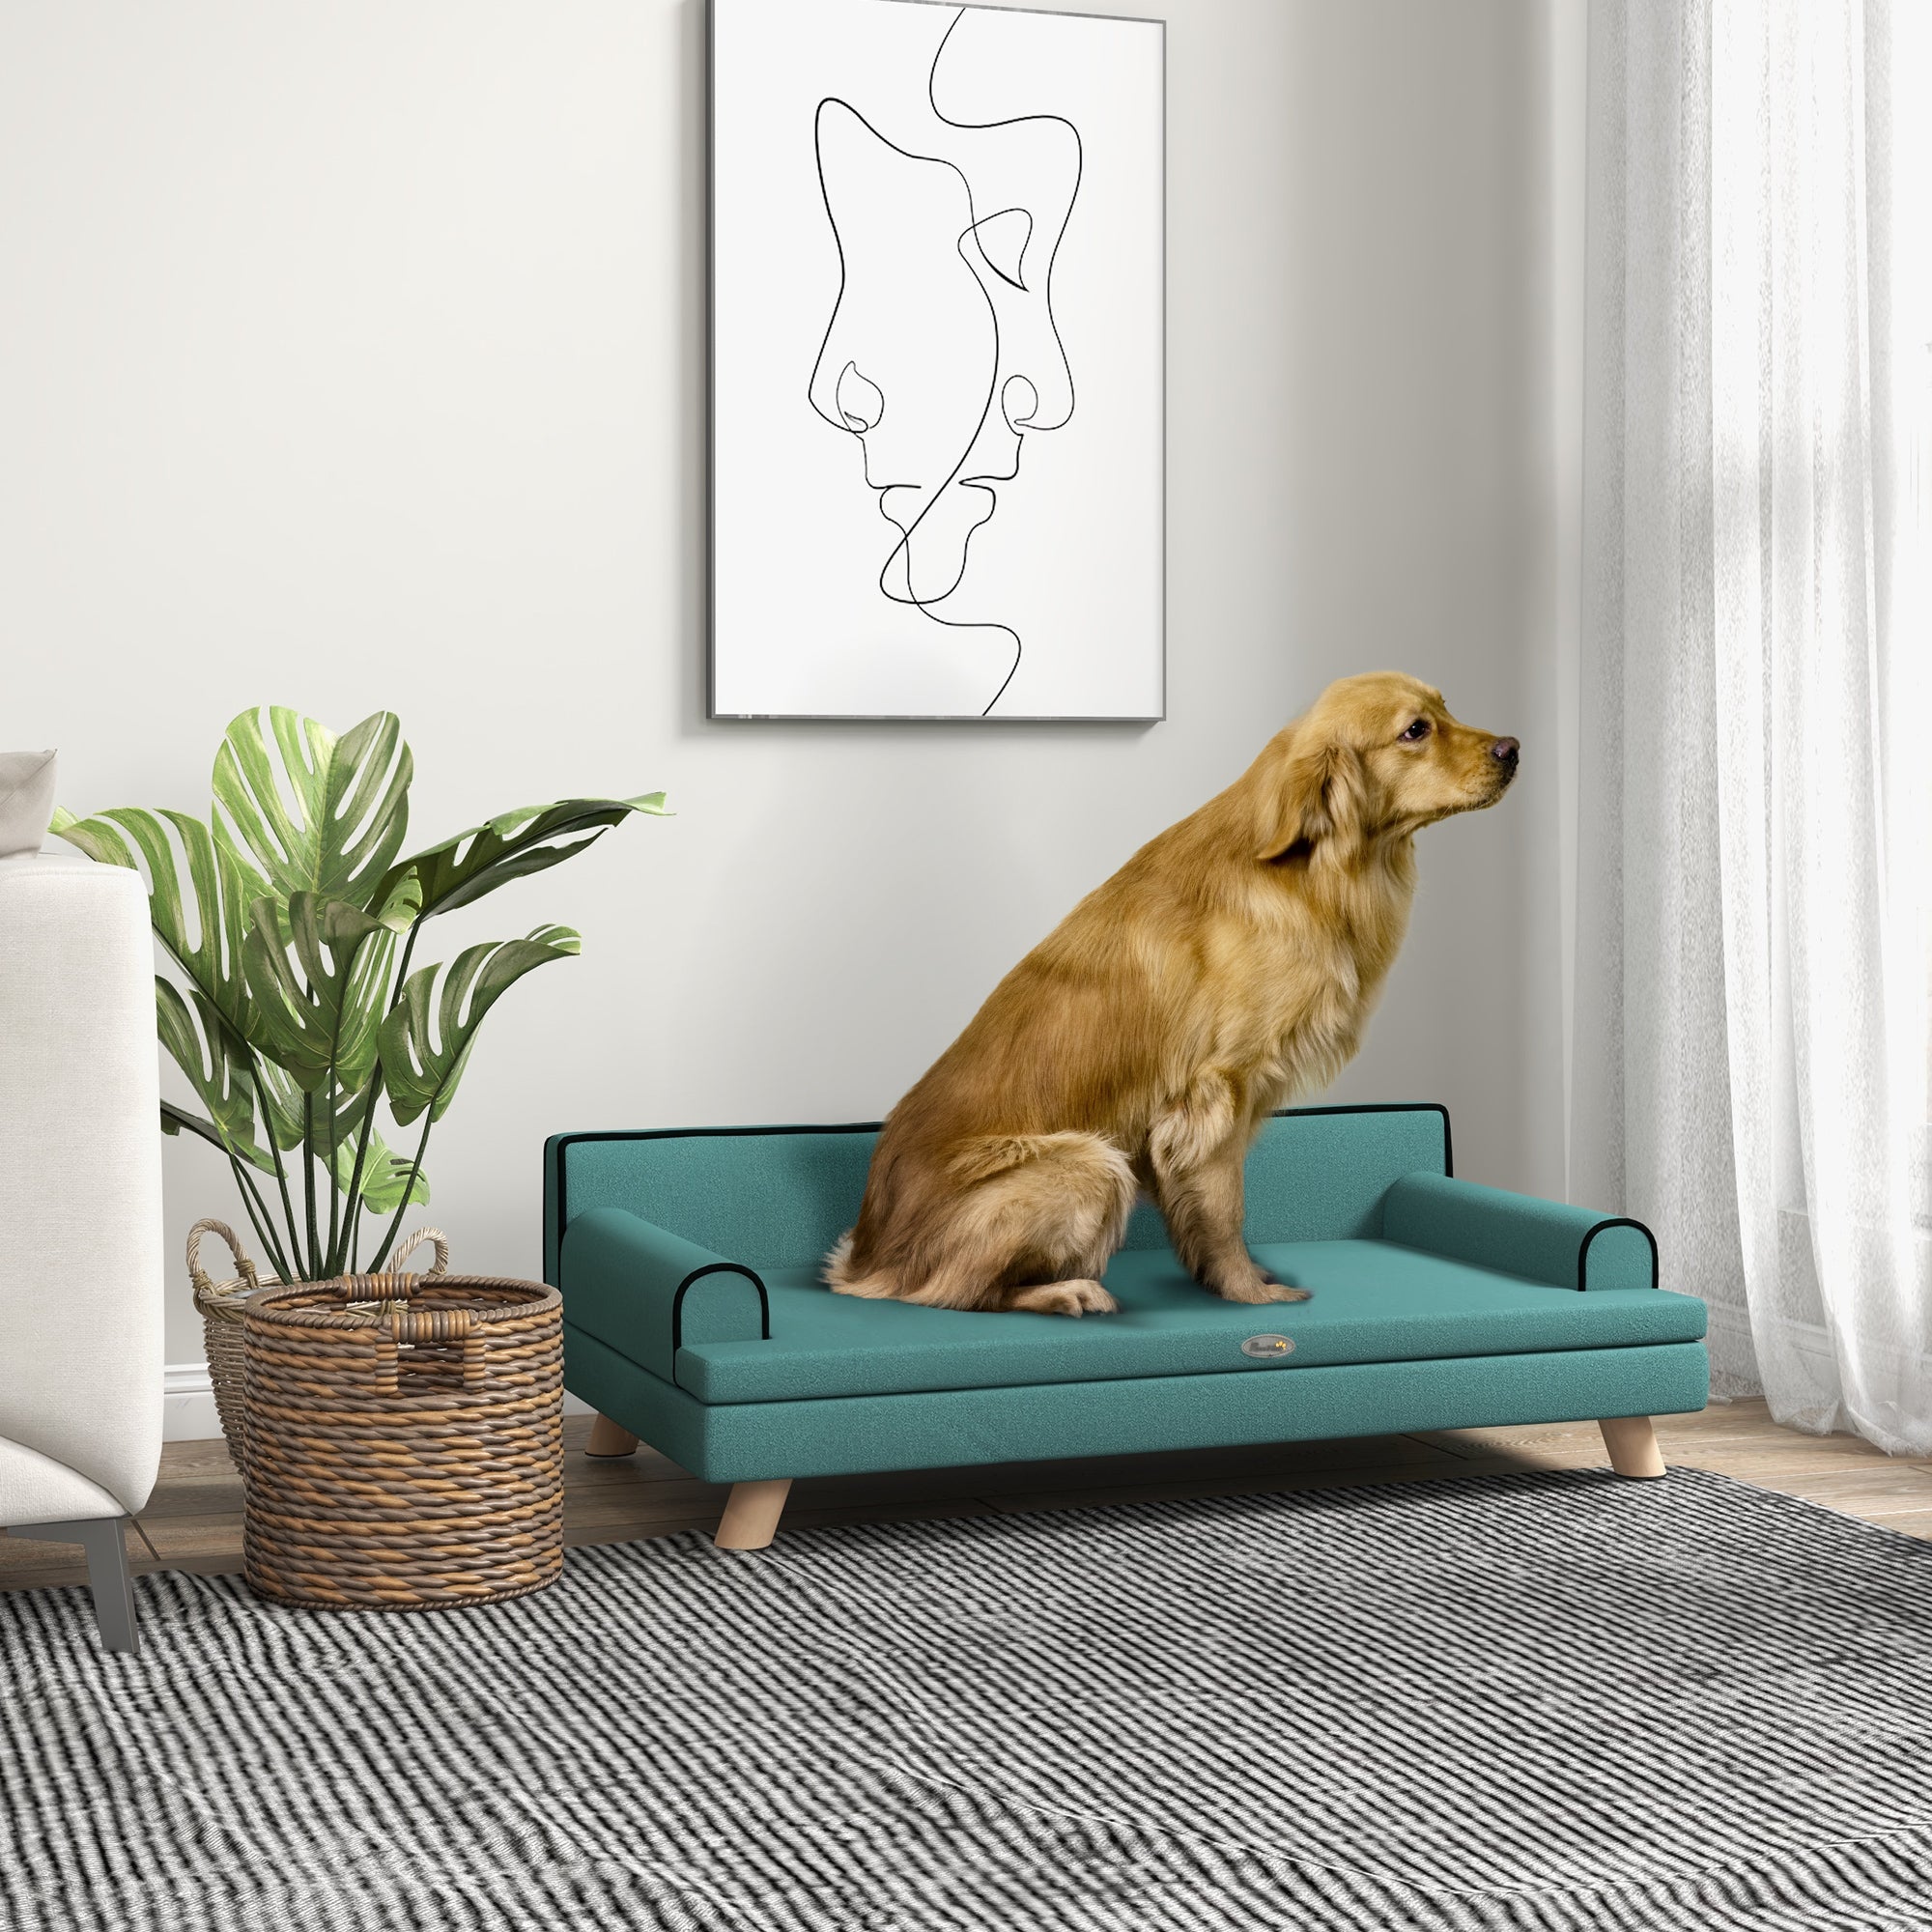 PawHut Dog Sofa with Legs Water-resistant Fabric, Pet Chair Bed for Large, Medium Dogs, Green, 100 x 62 x 32 cm